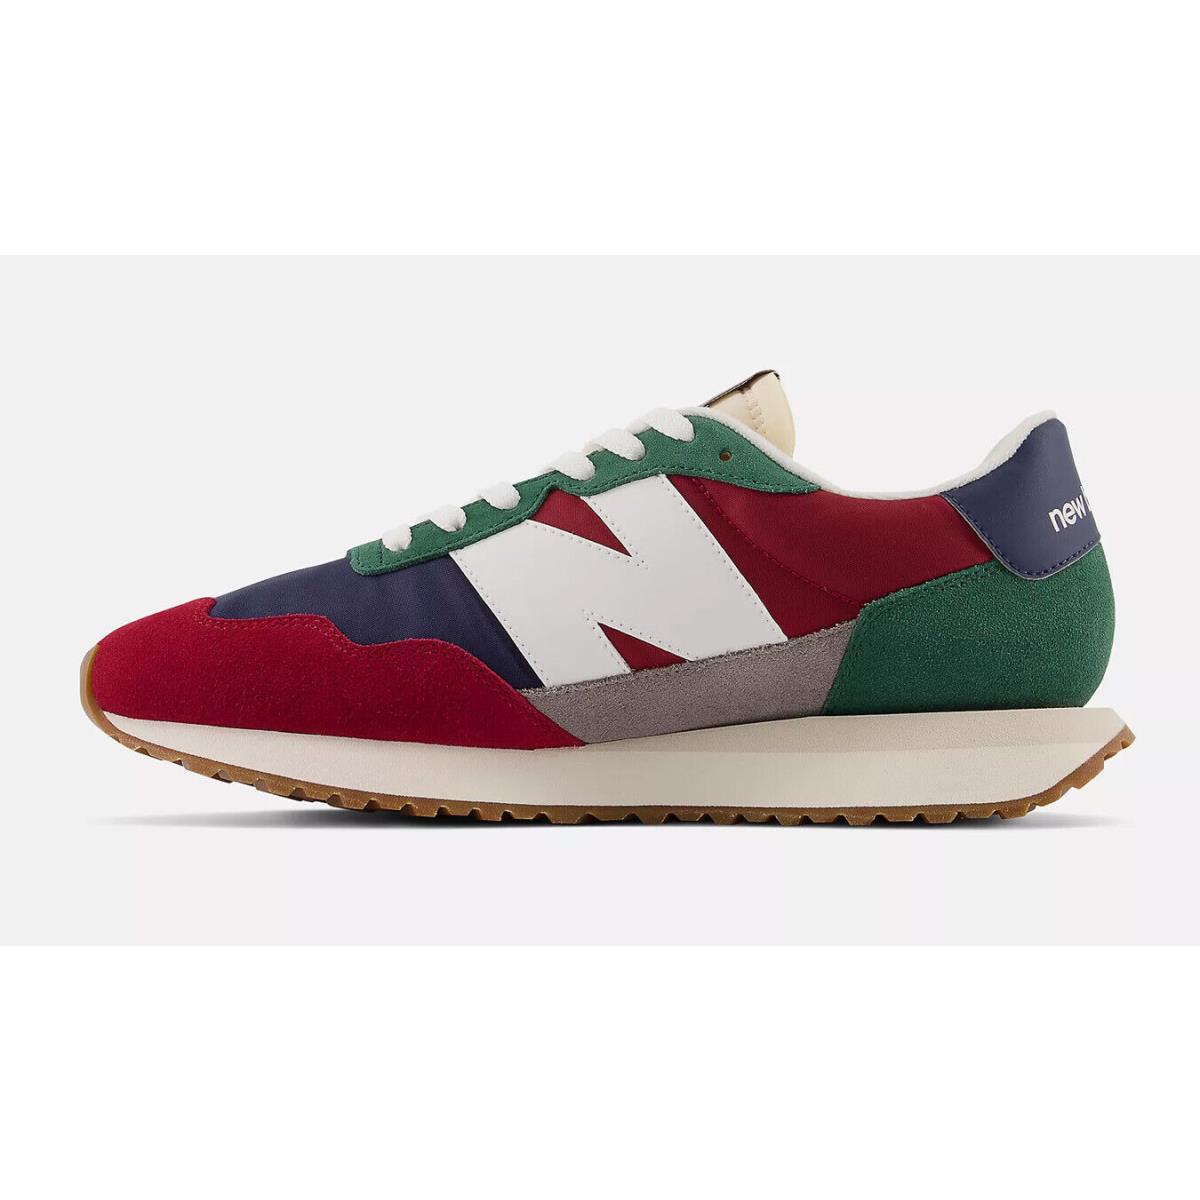 New Balance shoes  - Red/Green/Navy Blue 7